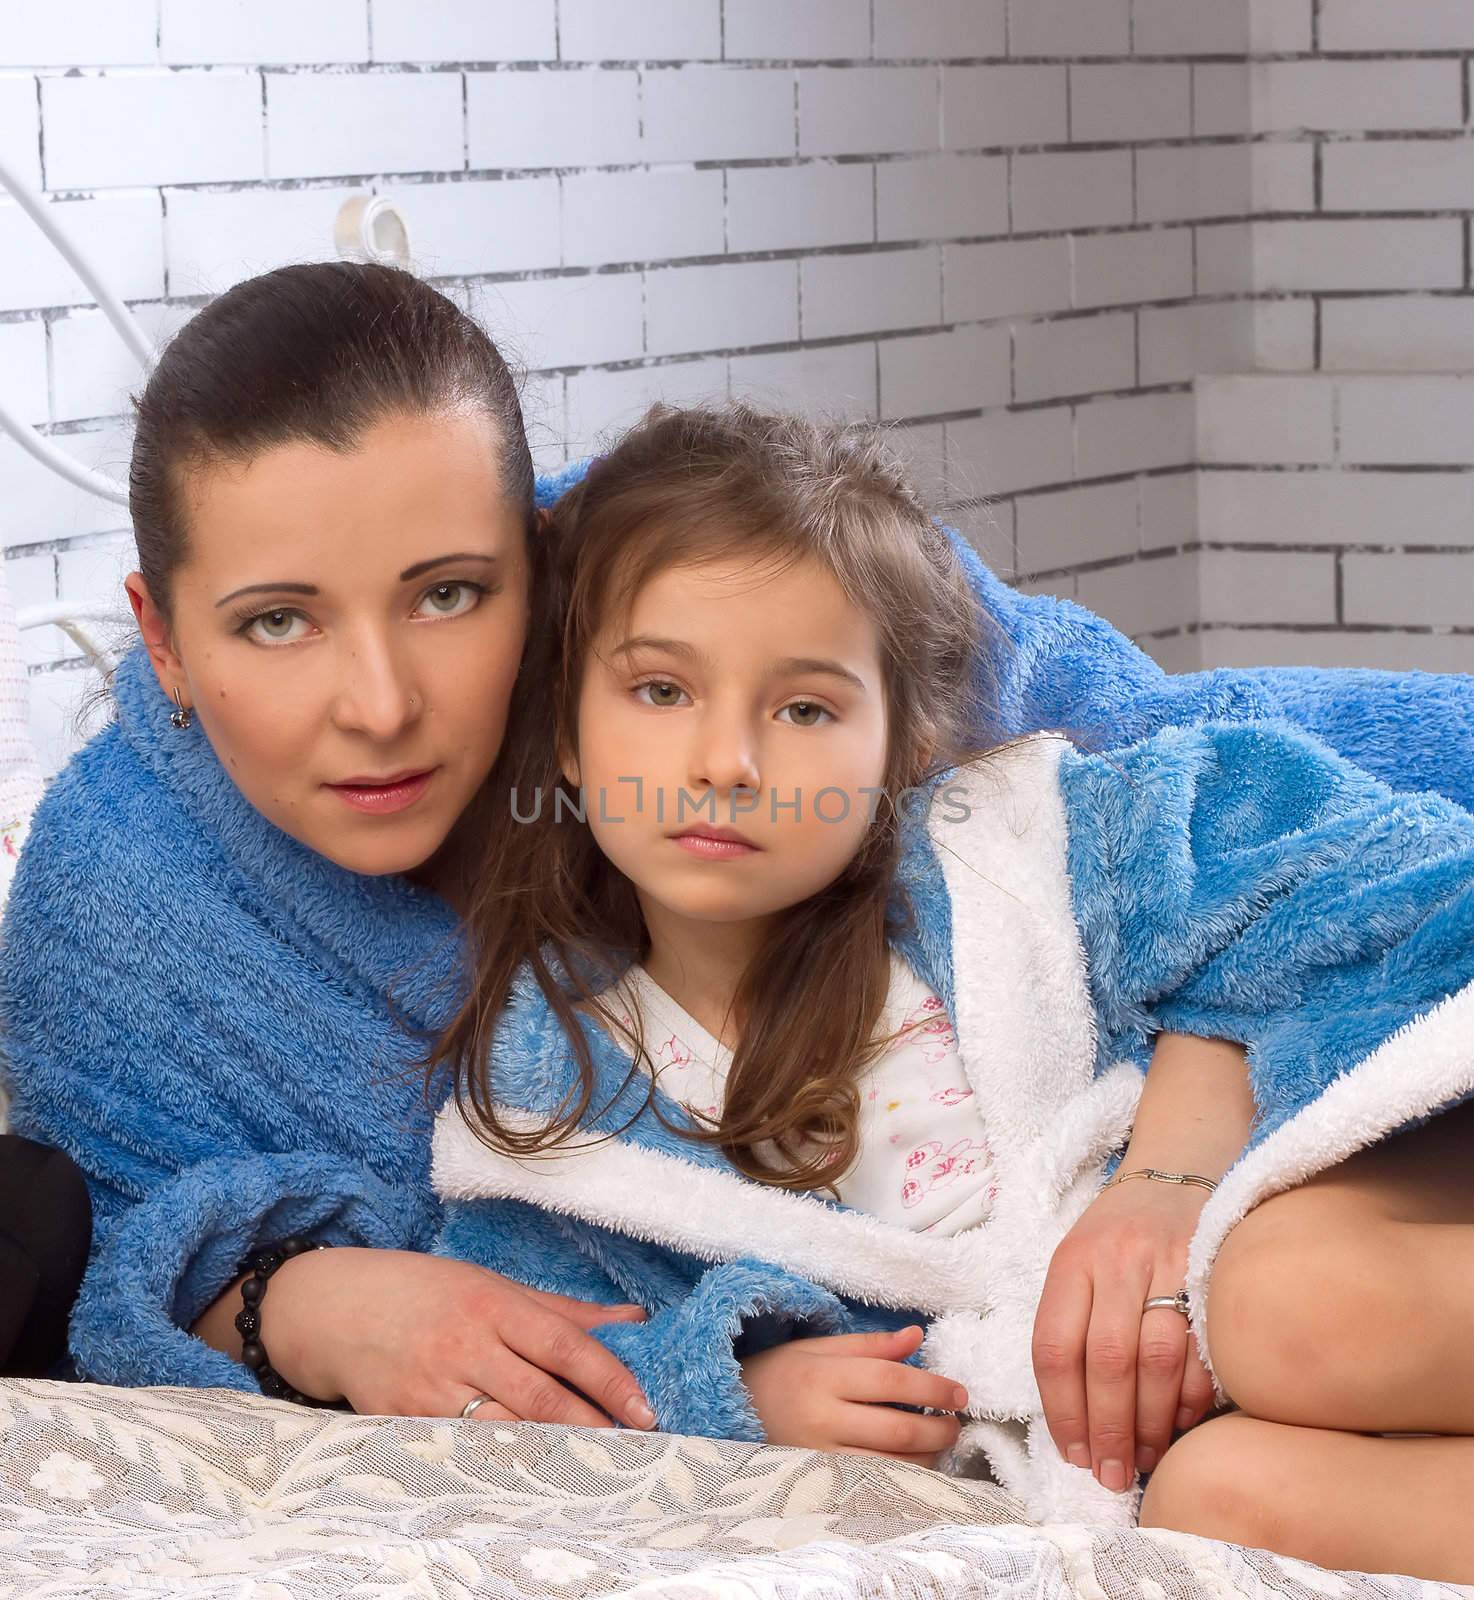 Mother and 5 year old daughter are in the same blue robes on the bed